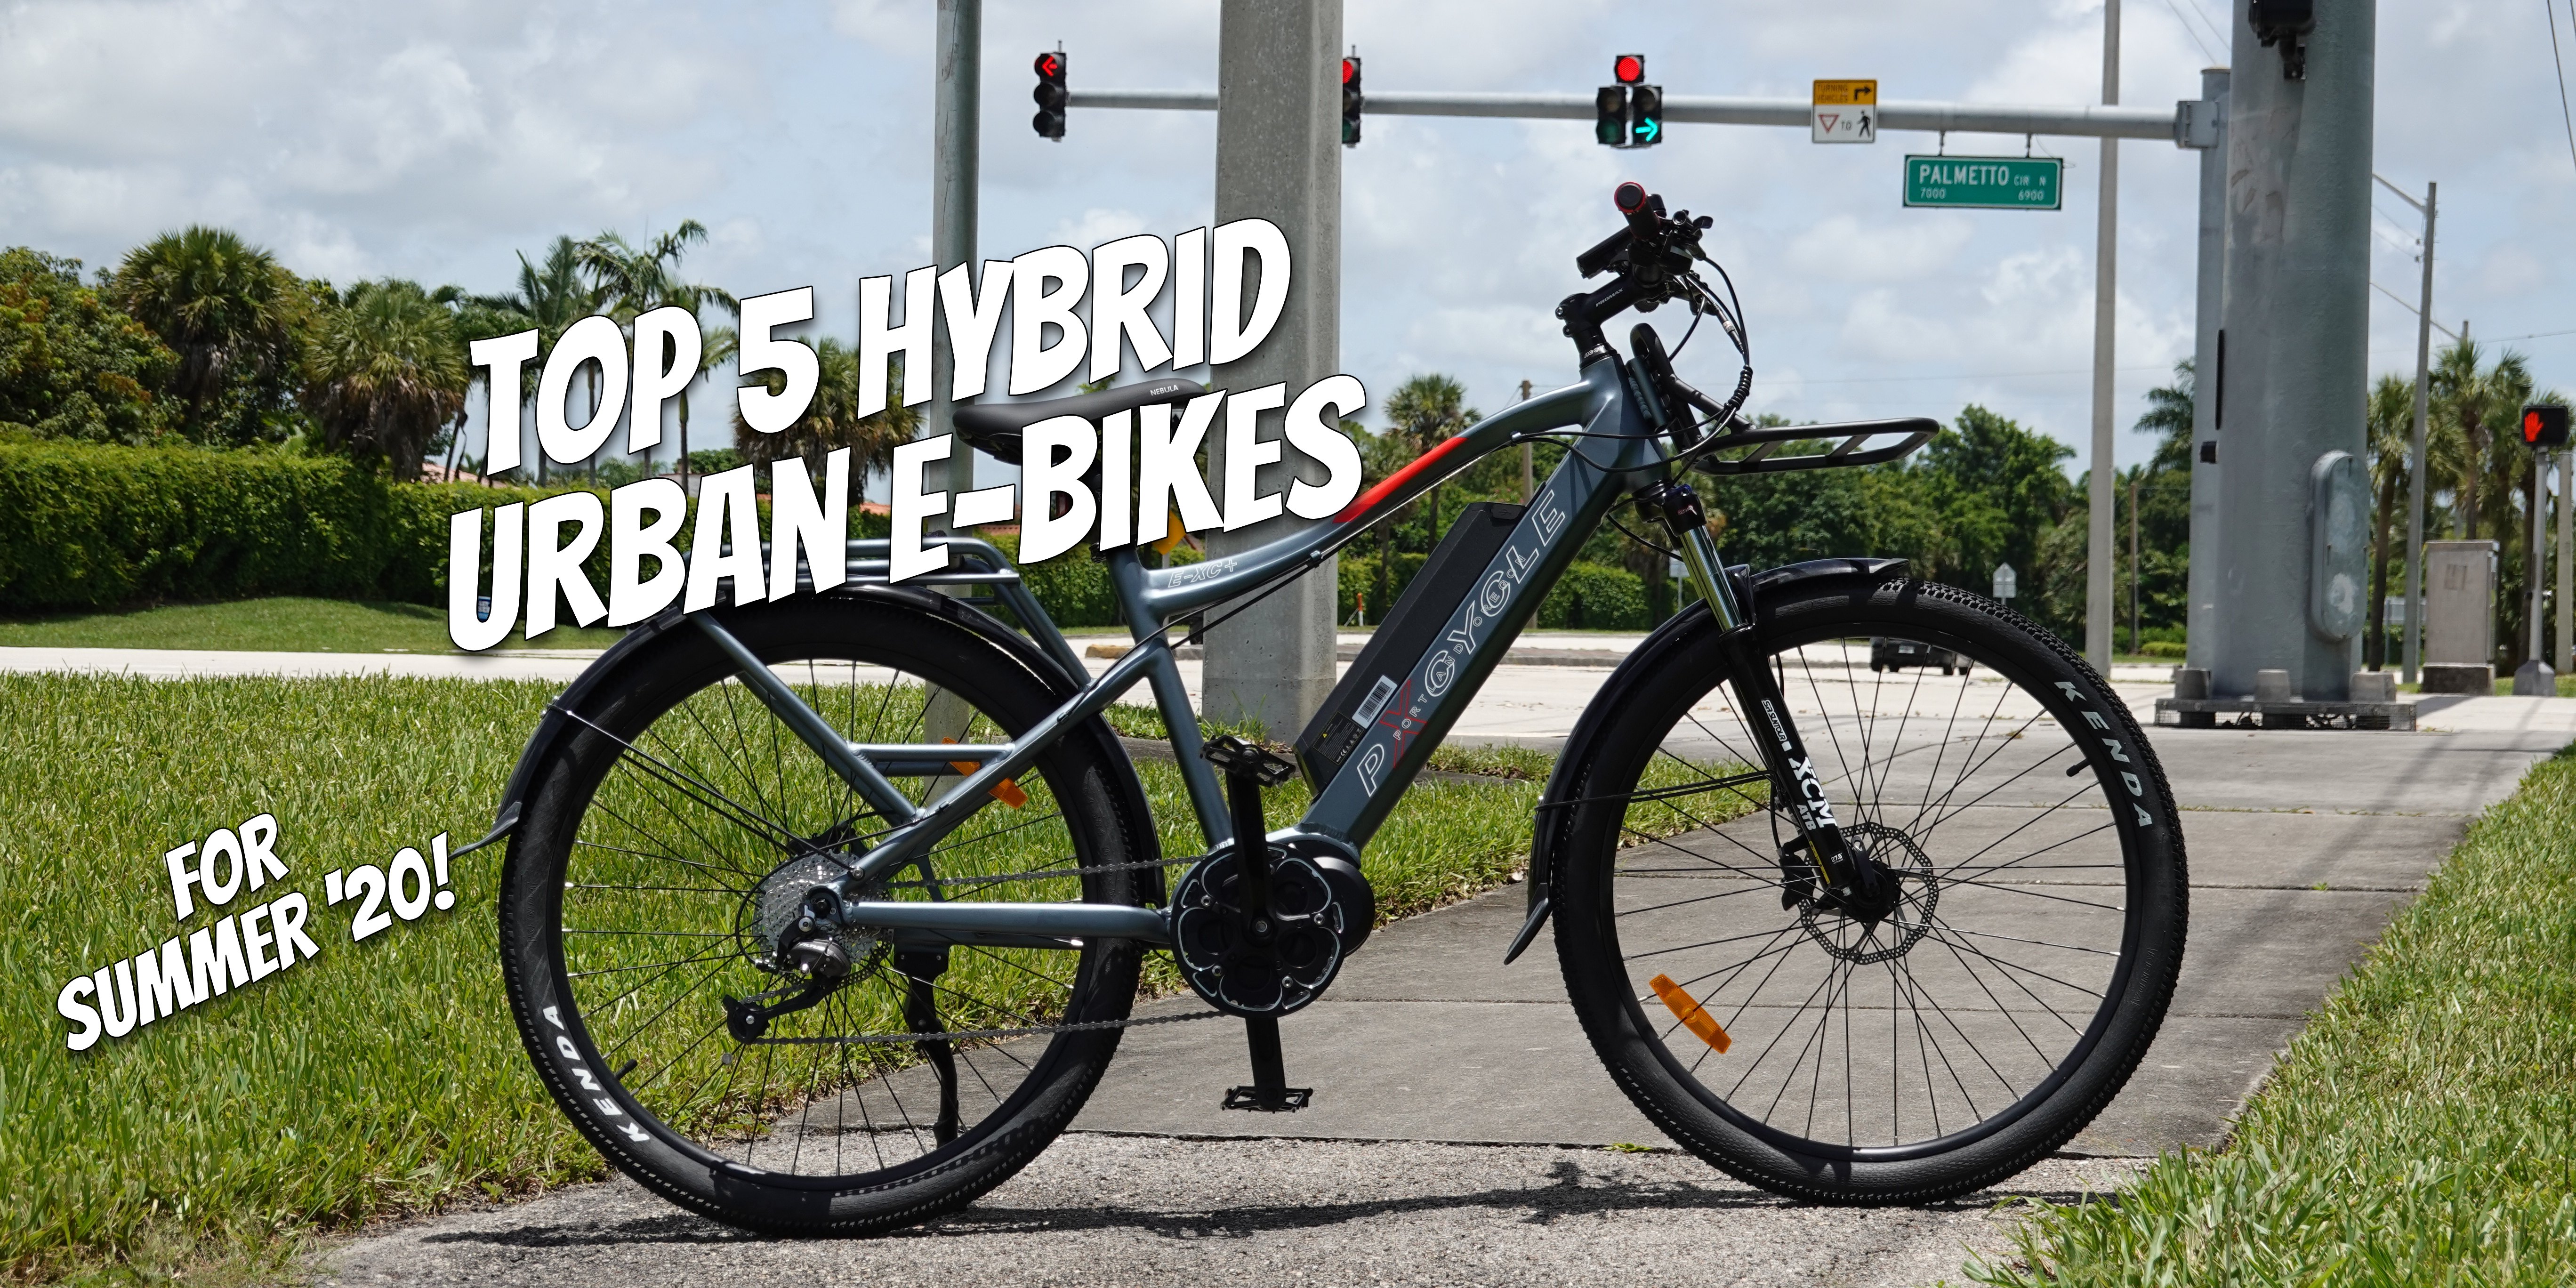 Are hybrid e-bikes suitable for off-road riding?